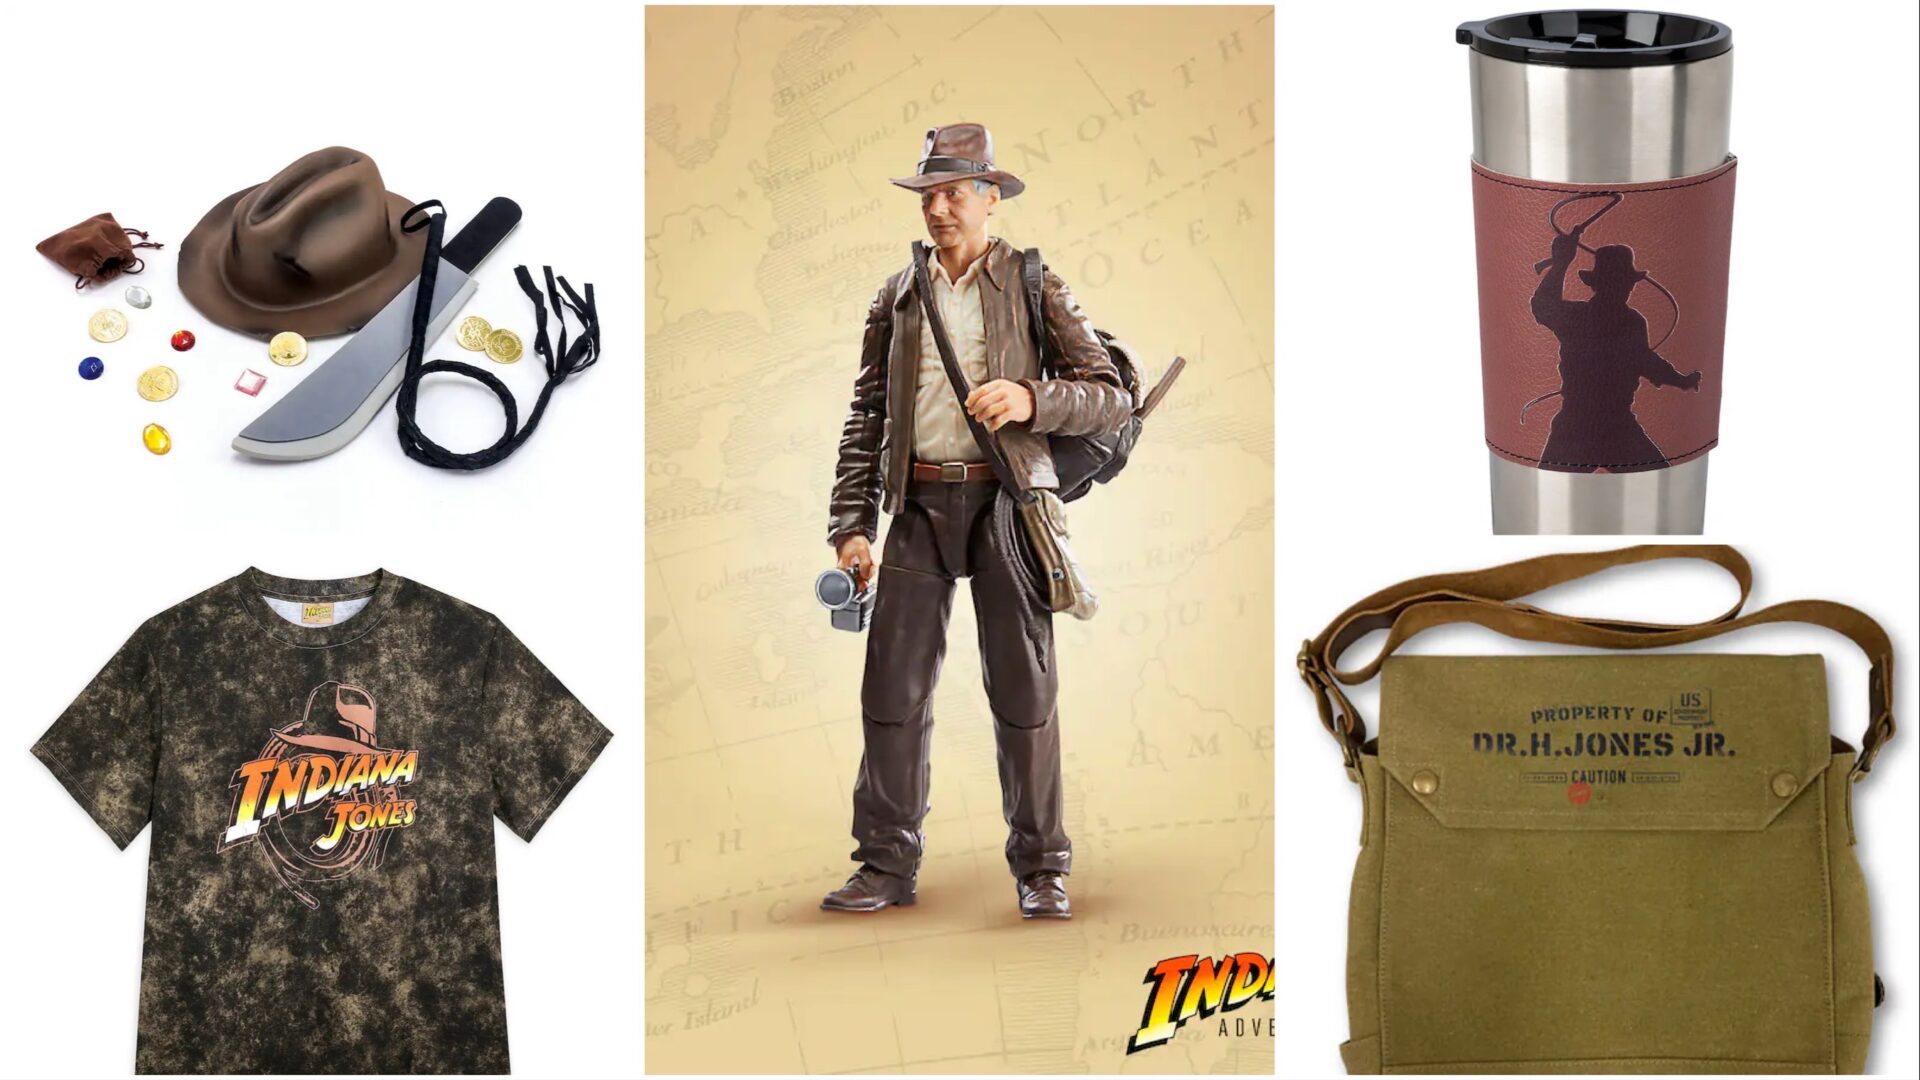 More Indiana Jones Dial of Destiny Products Announced Ahead Of Theatrical Release!